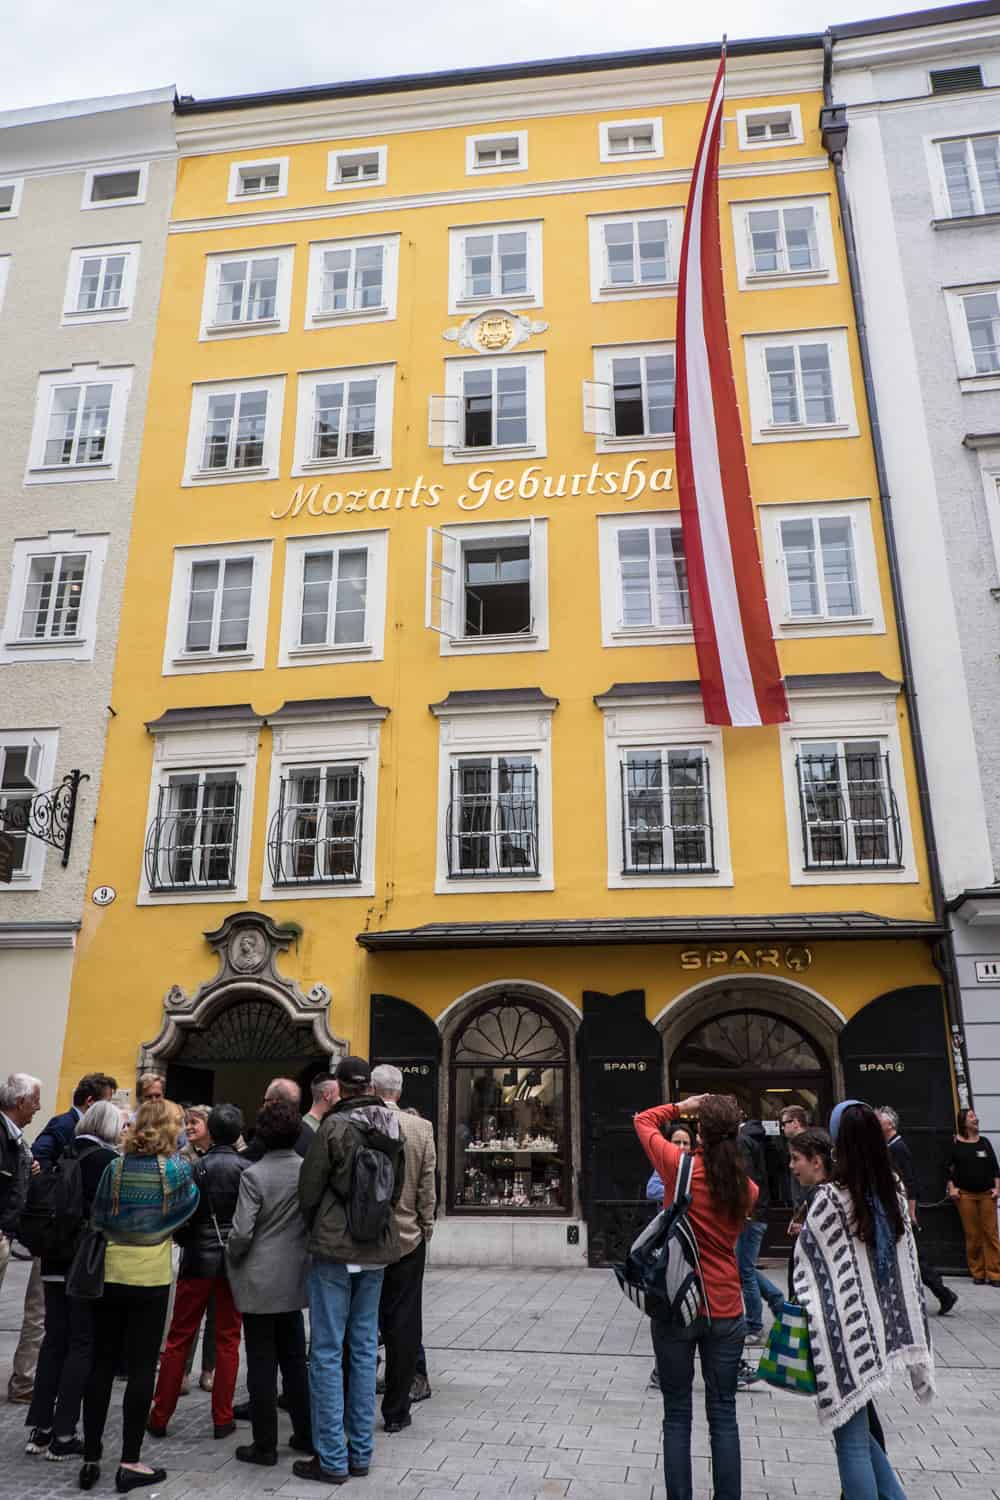 People stand outside a tall, rectangular yellow house with a red and white stripped Austrian flag. The words on the building read: "Mozart's Geburtshaus" (Mozart's Birth House). 